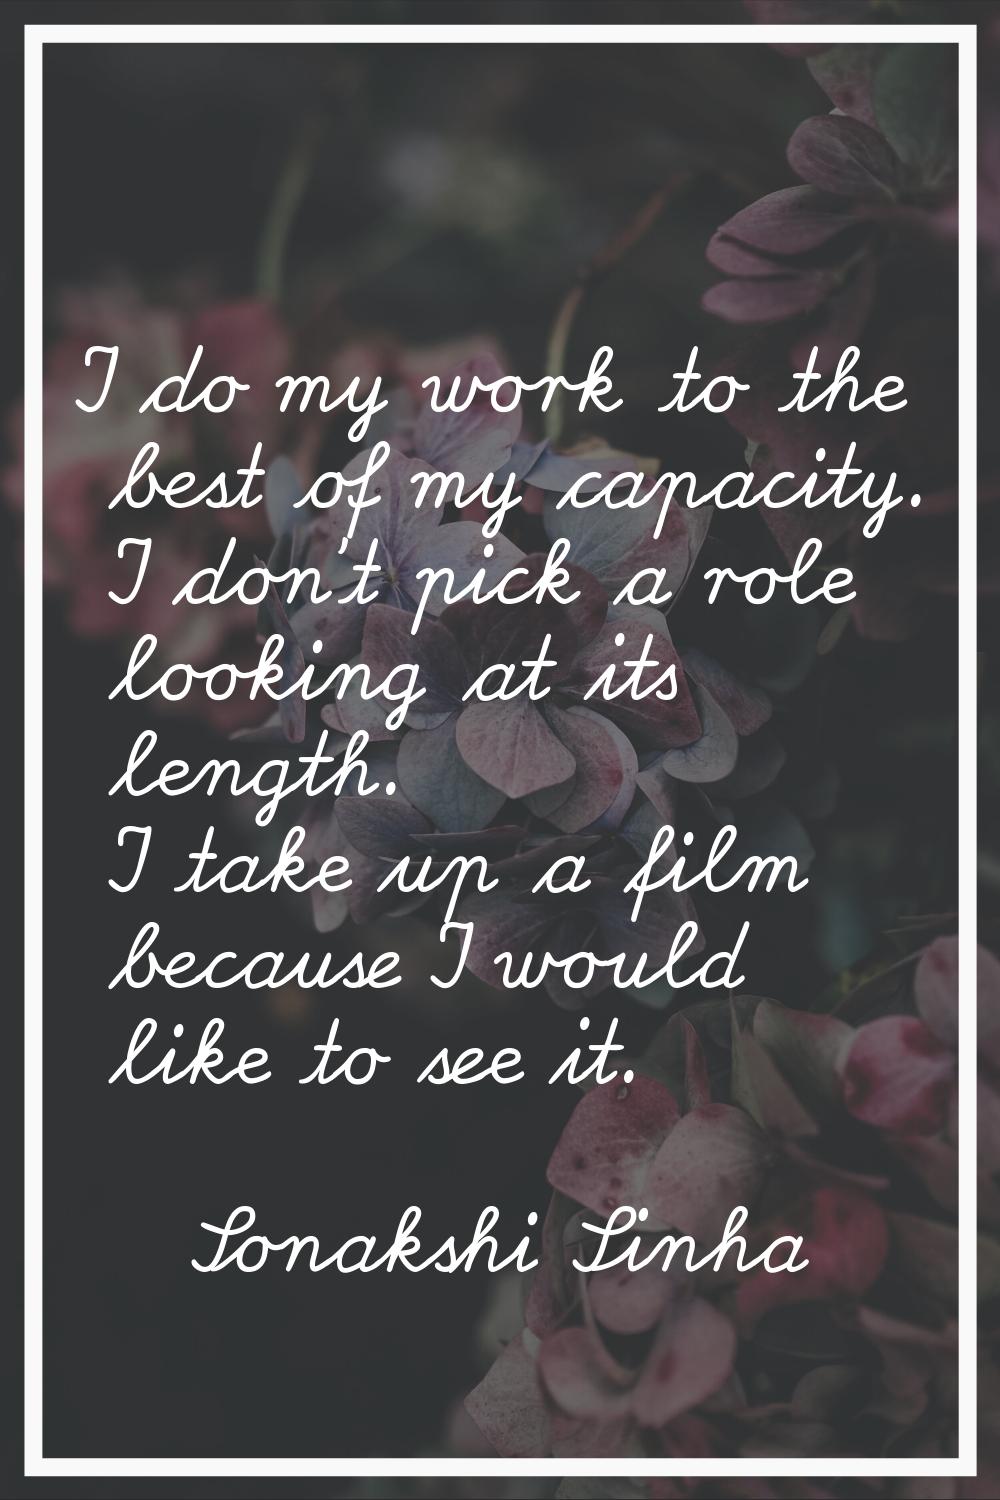 I do my work to the best of my capacity. I don't pick a role looking at its length. I take up a fil